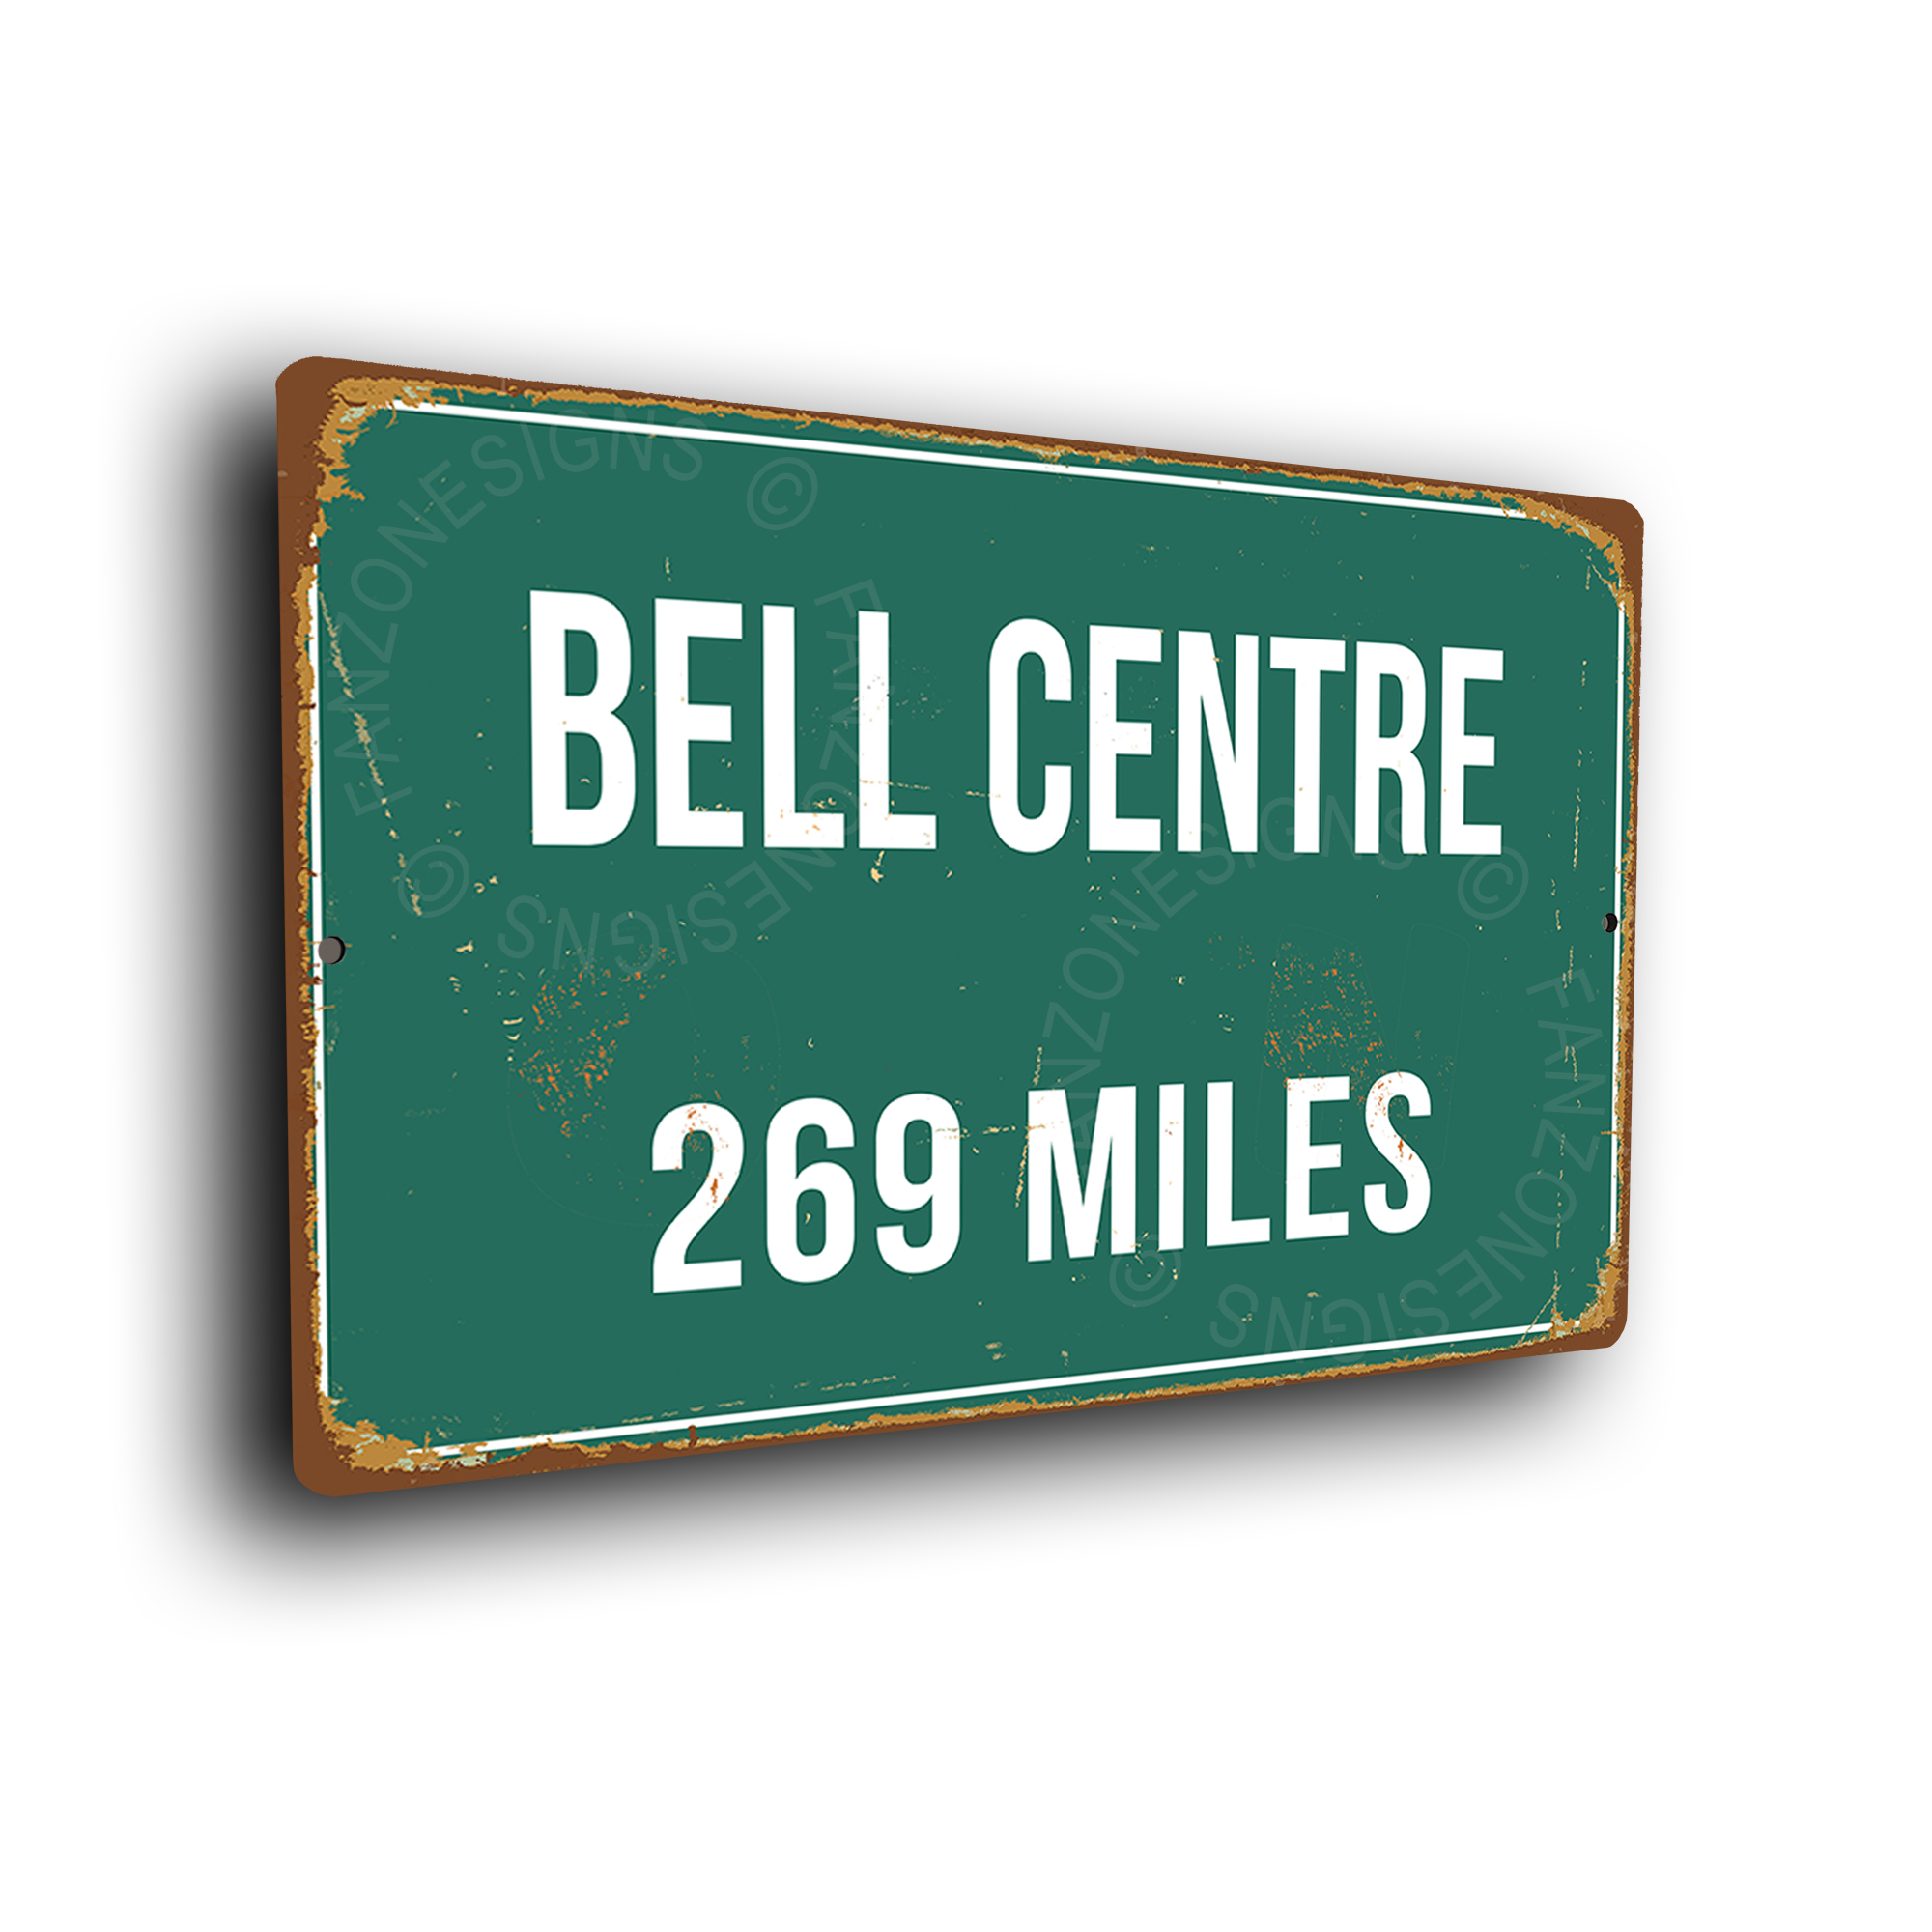 Bell Centre Miles Signs